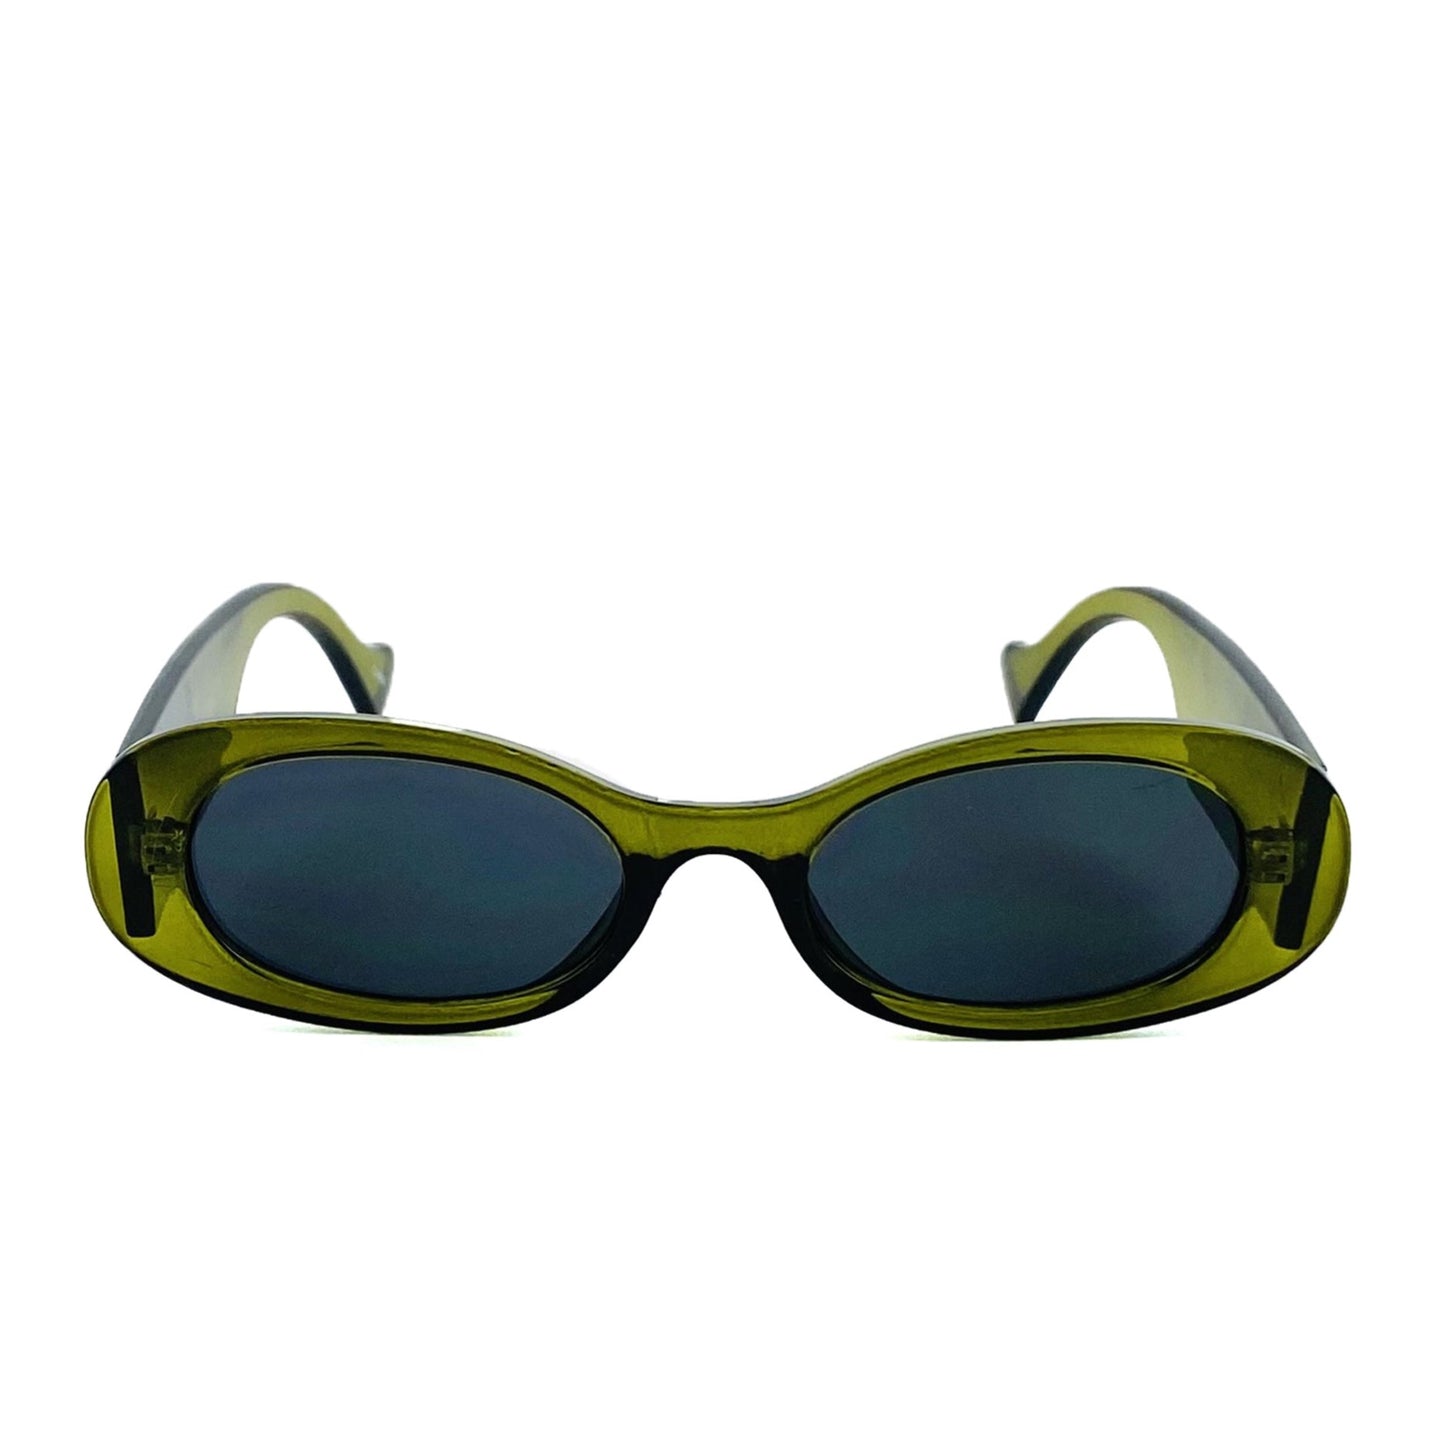 Authentic oversized mod style retro greenn sunglasses with thick frame and dark lenses